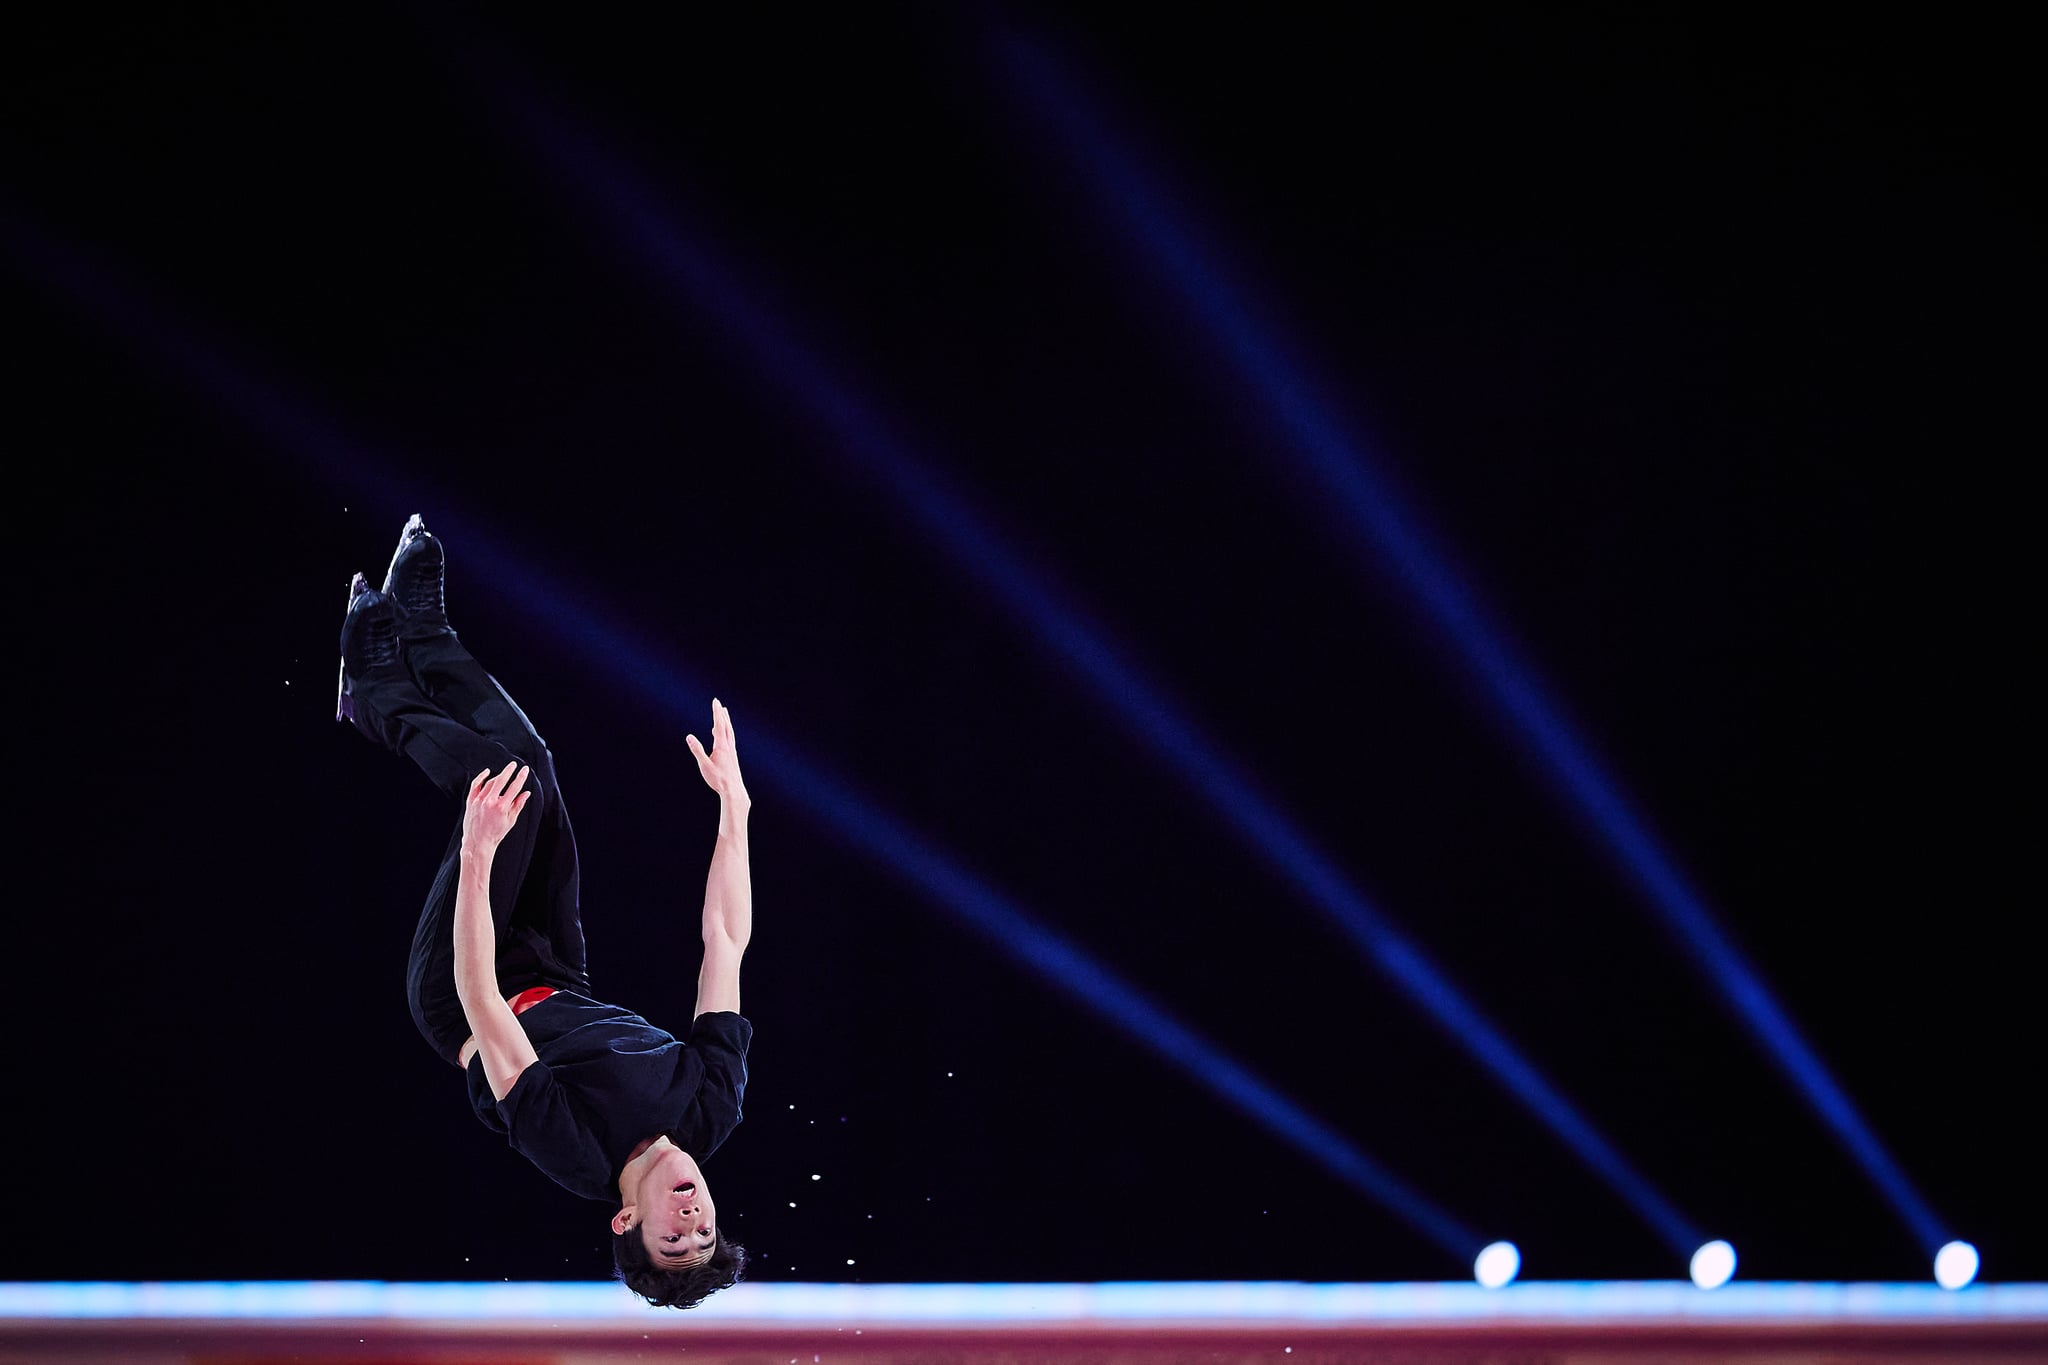 Nathan Chen performs a backflip in the Gala Exhibition of the 2021 ISU World Figure Skating Championships